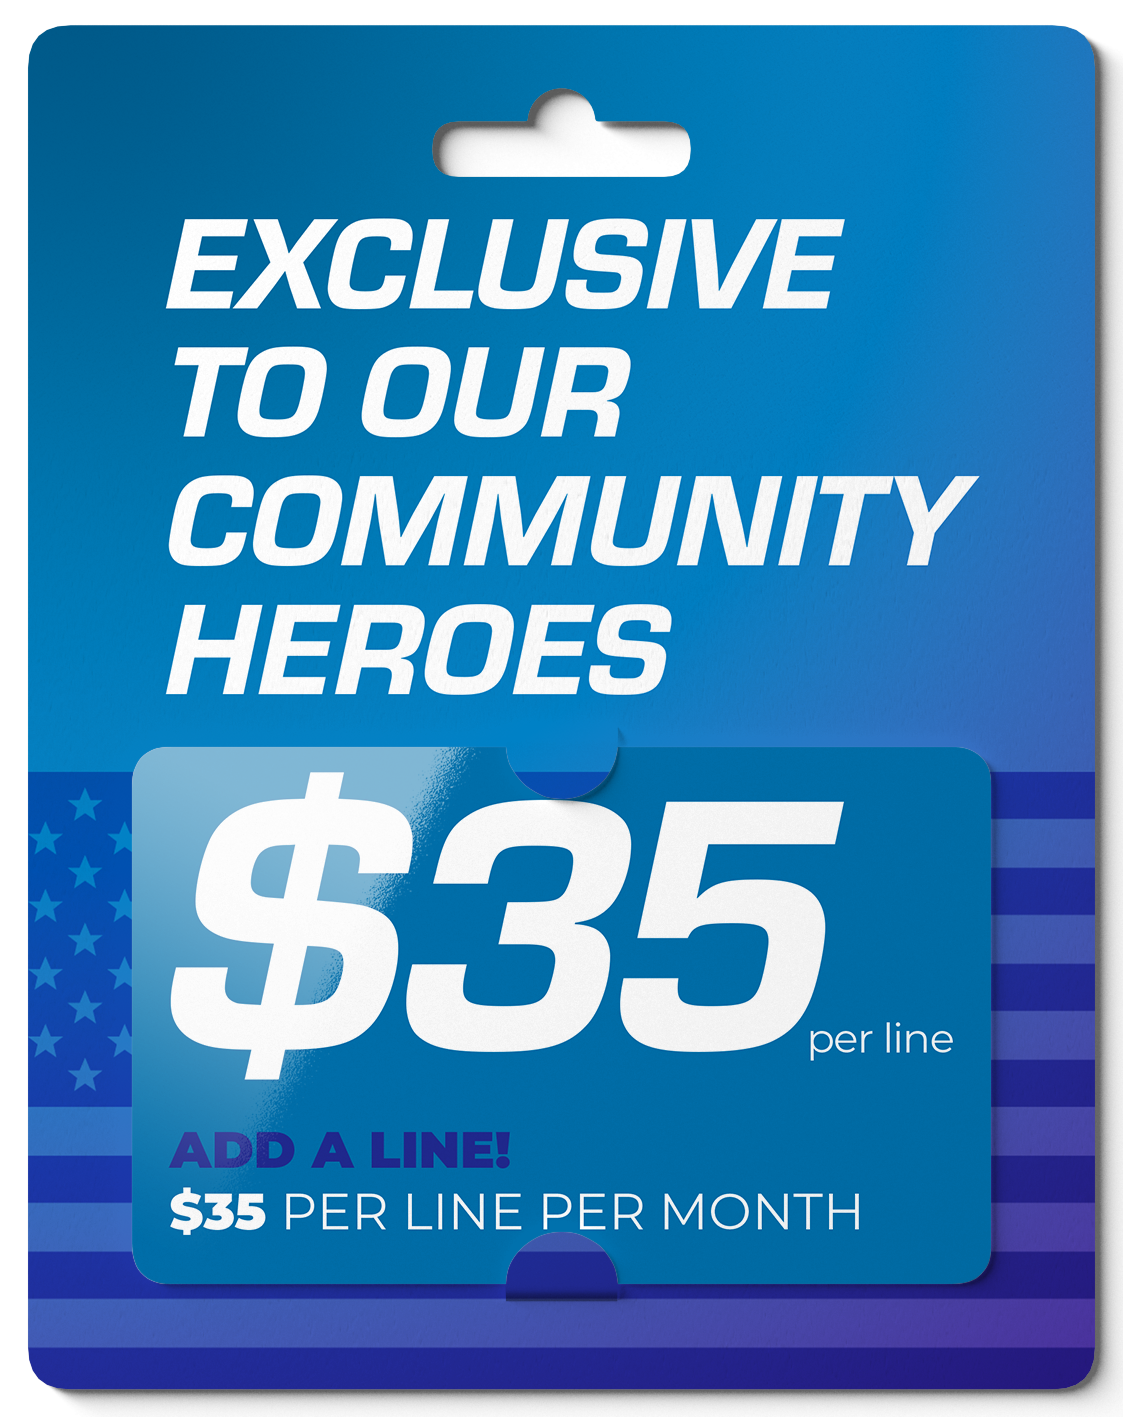 Exclusive to our community heroes